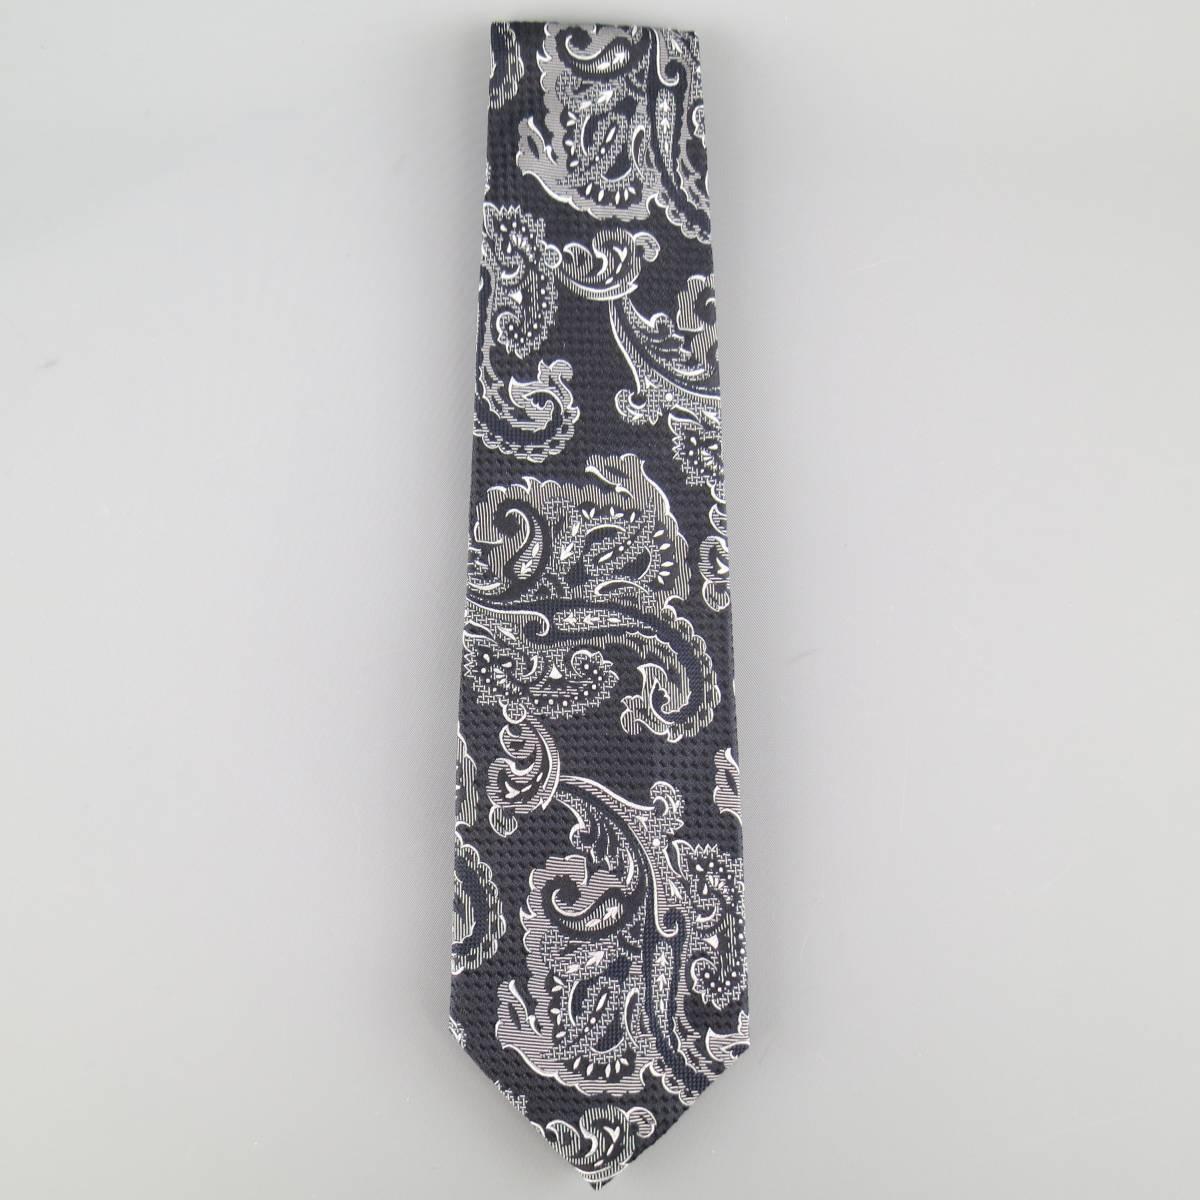 GIANNI VERSACE Tie consists of 100% silk material in a black and white color tone. Designed in a classic style, paisley brocade stitched pattern. Comes with original boxing. Made in Italy.
 
Excellent Pre-Owned Condition
 
Measurements
 
Width: 9.5